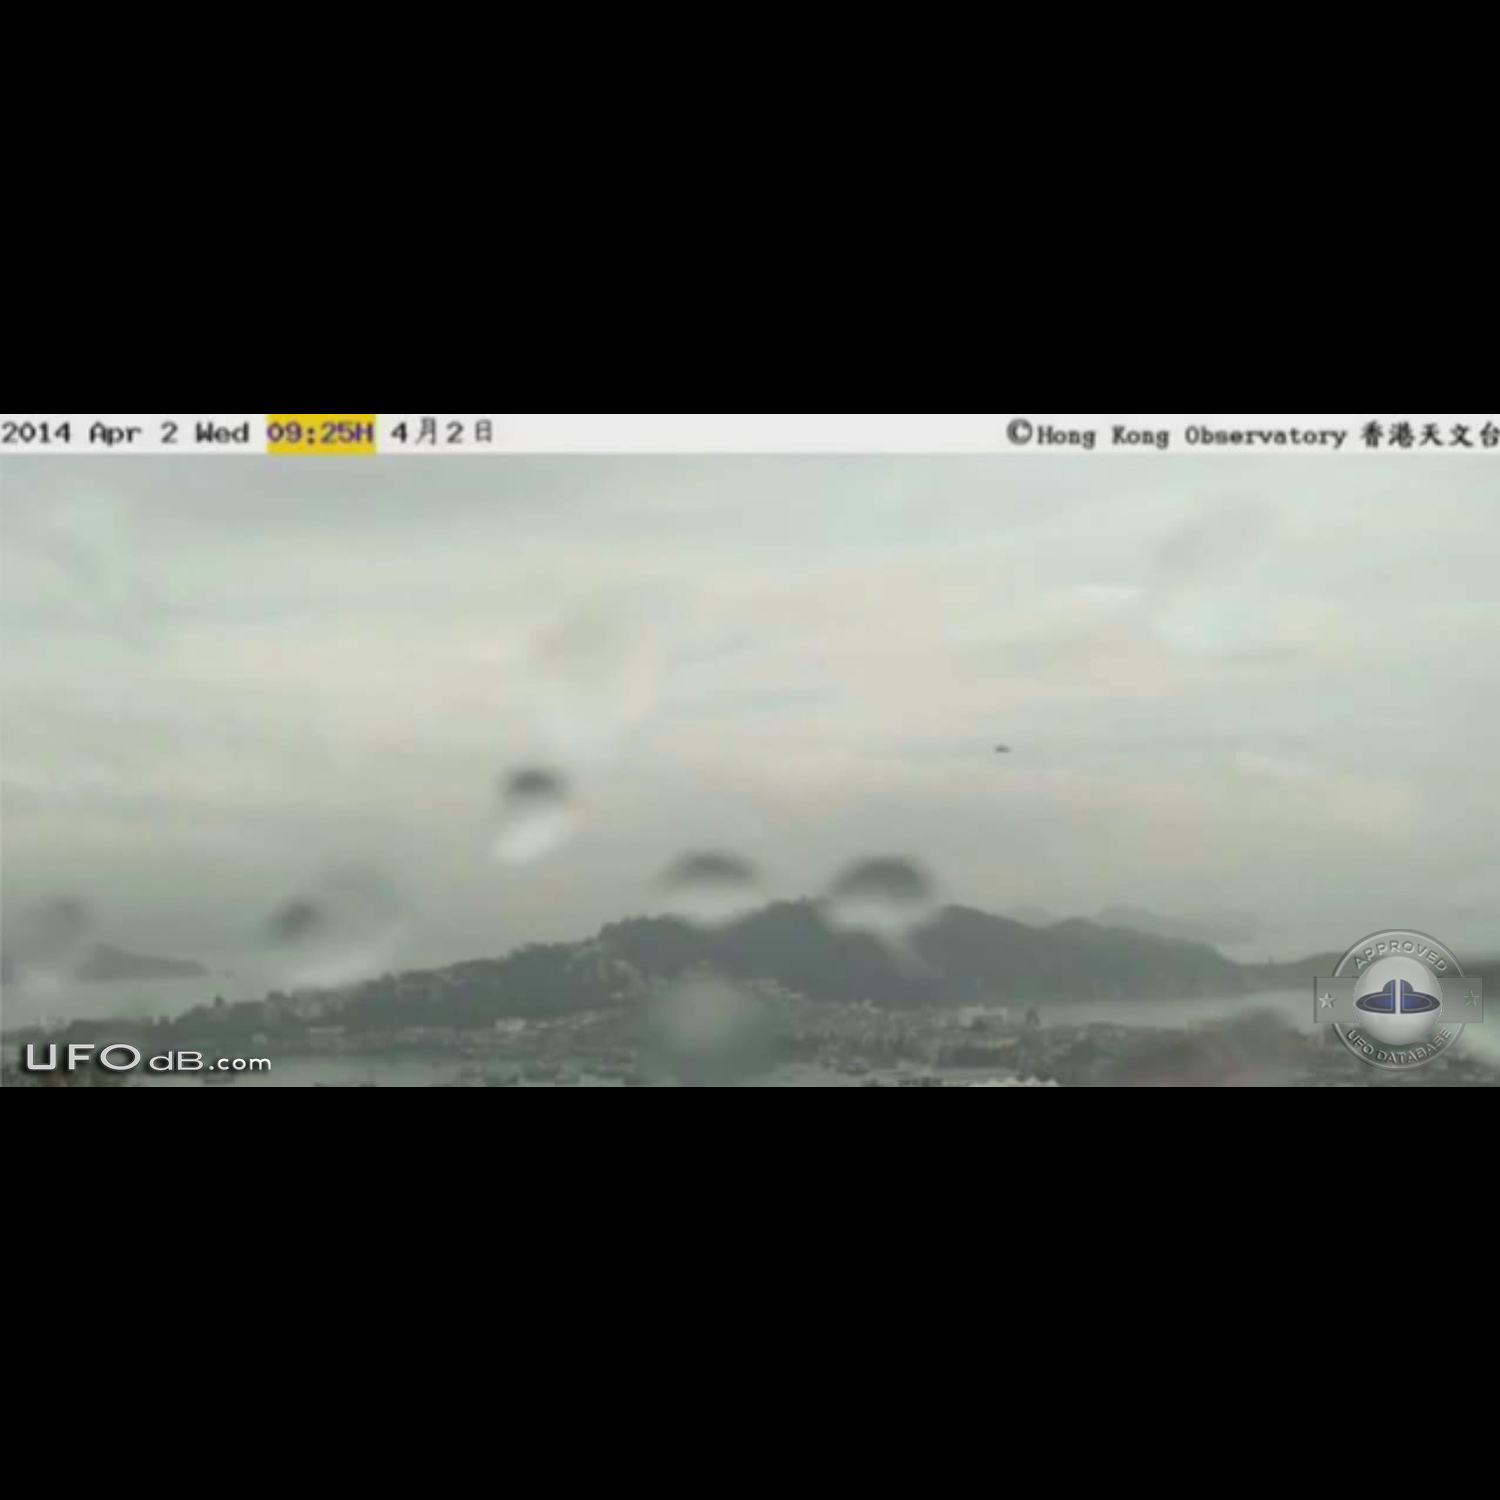 UFO caught on Picture by Hong Kong weather camera - April 2014 UFO Picture #567-1